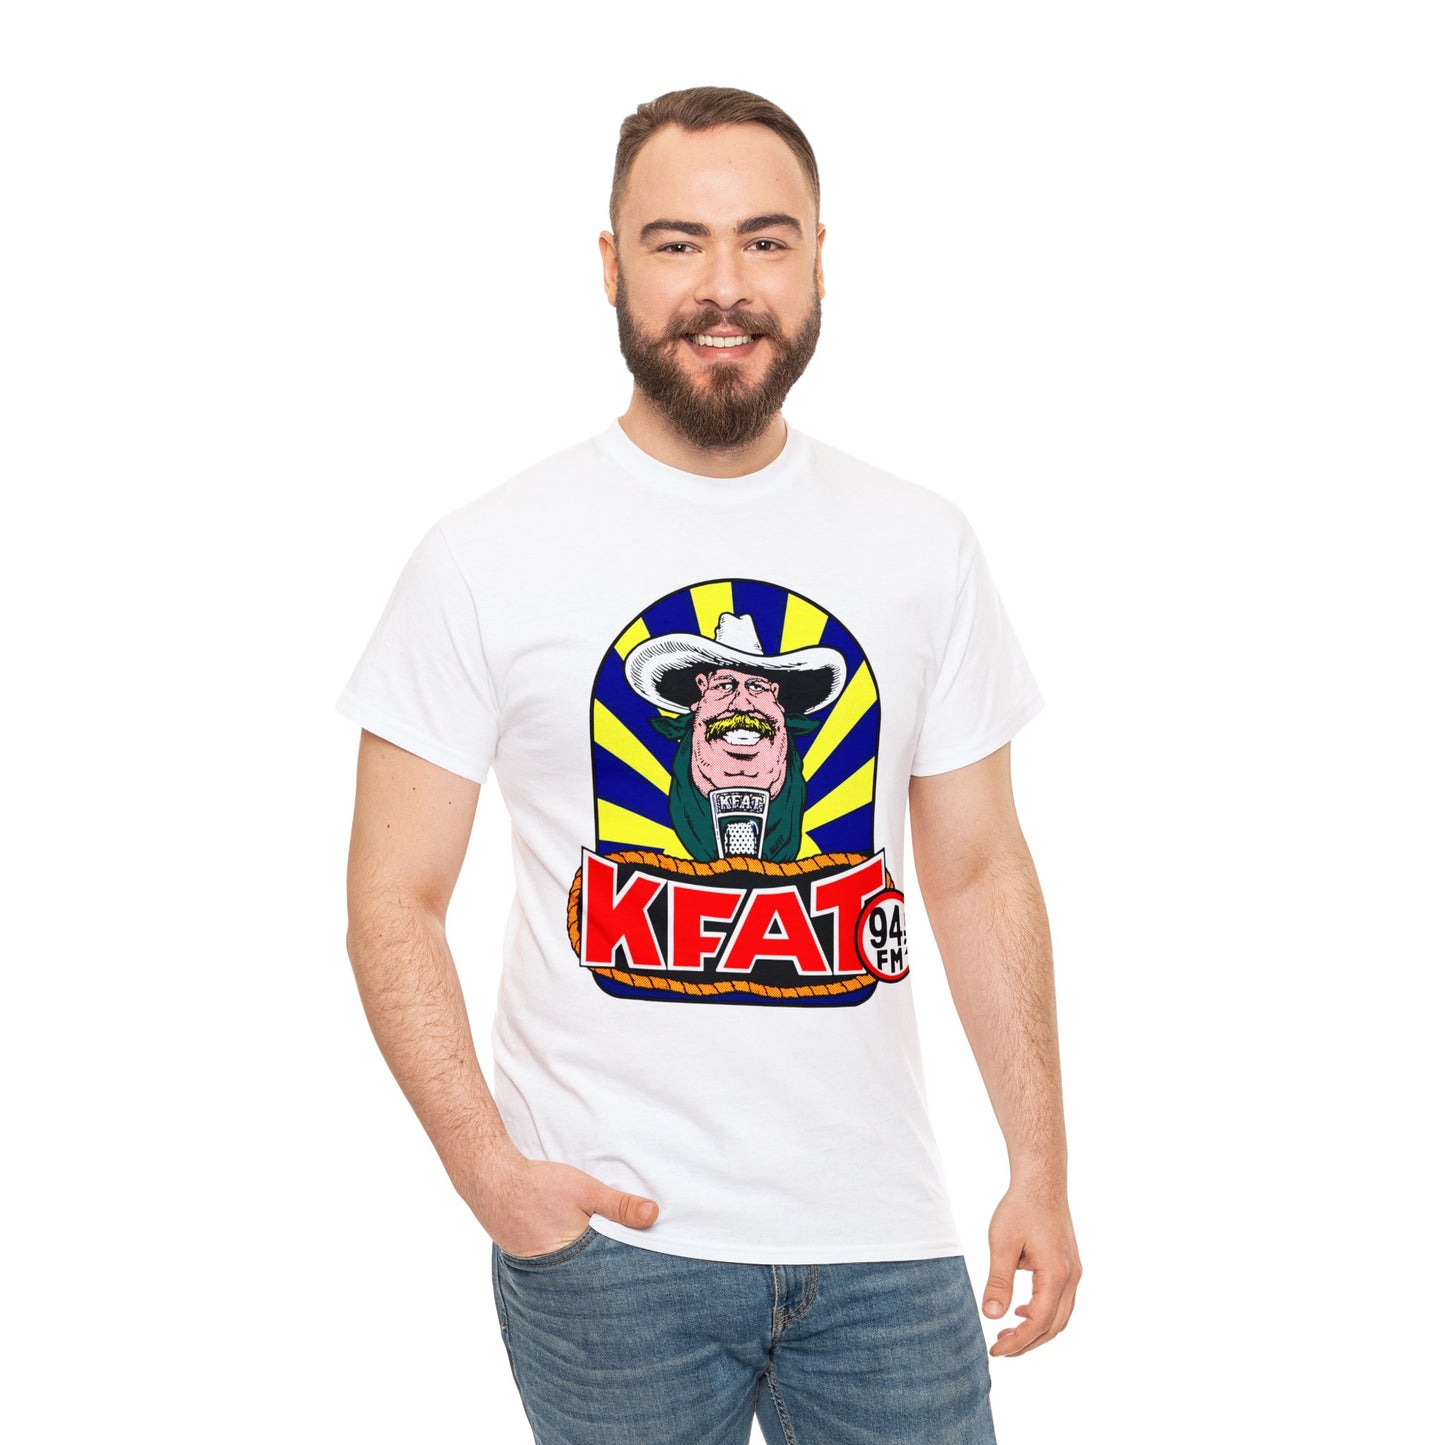 KFAT Because We Need The Bucks T-shirt for Sale